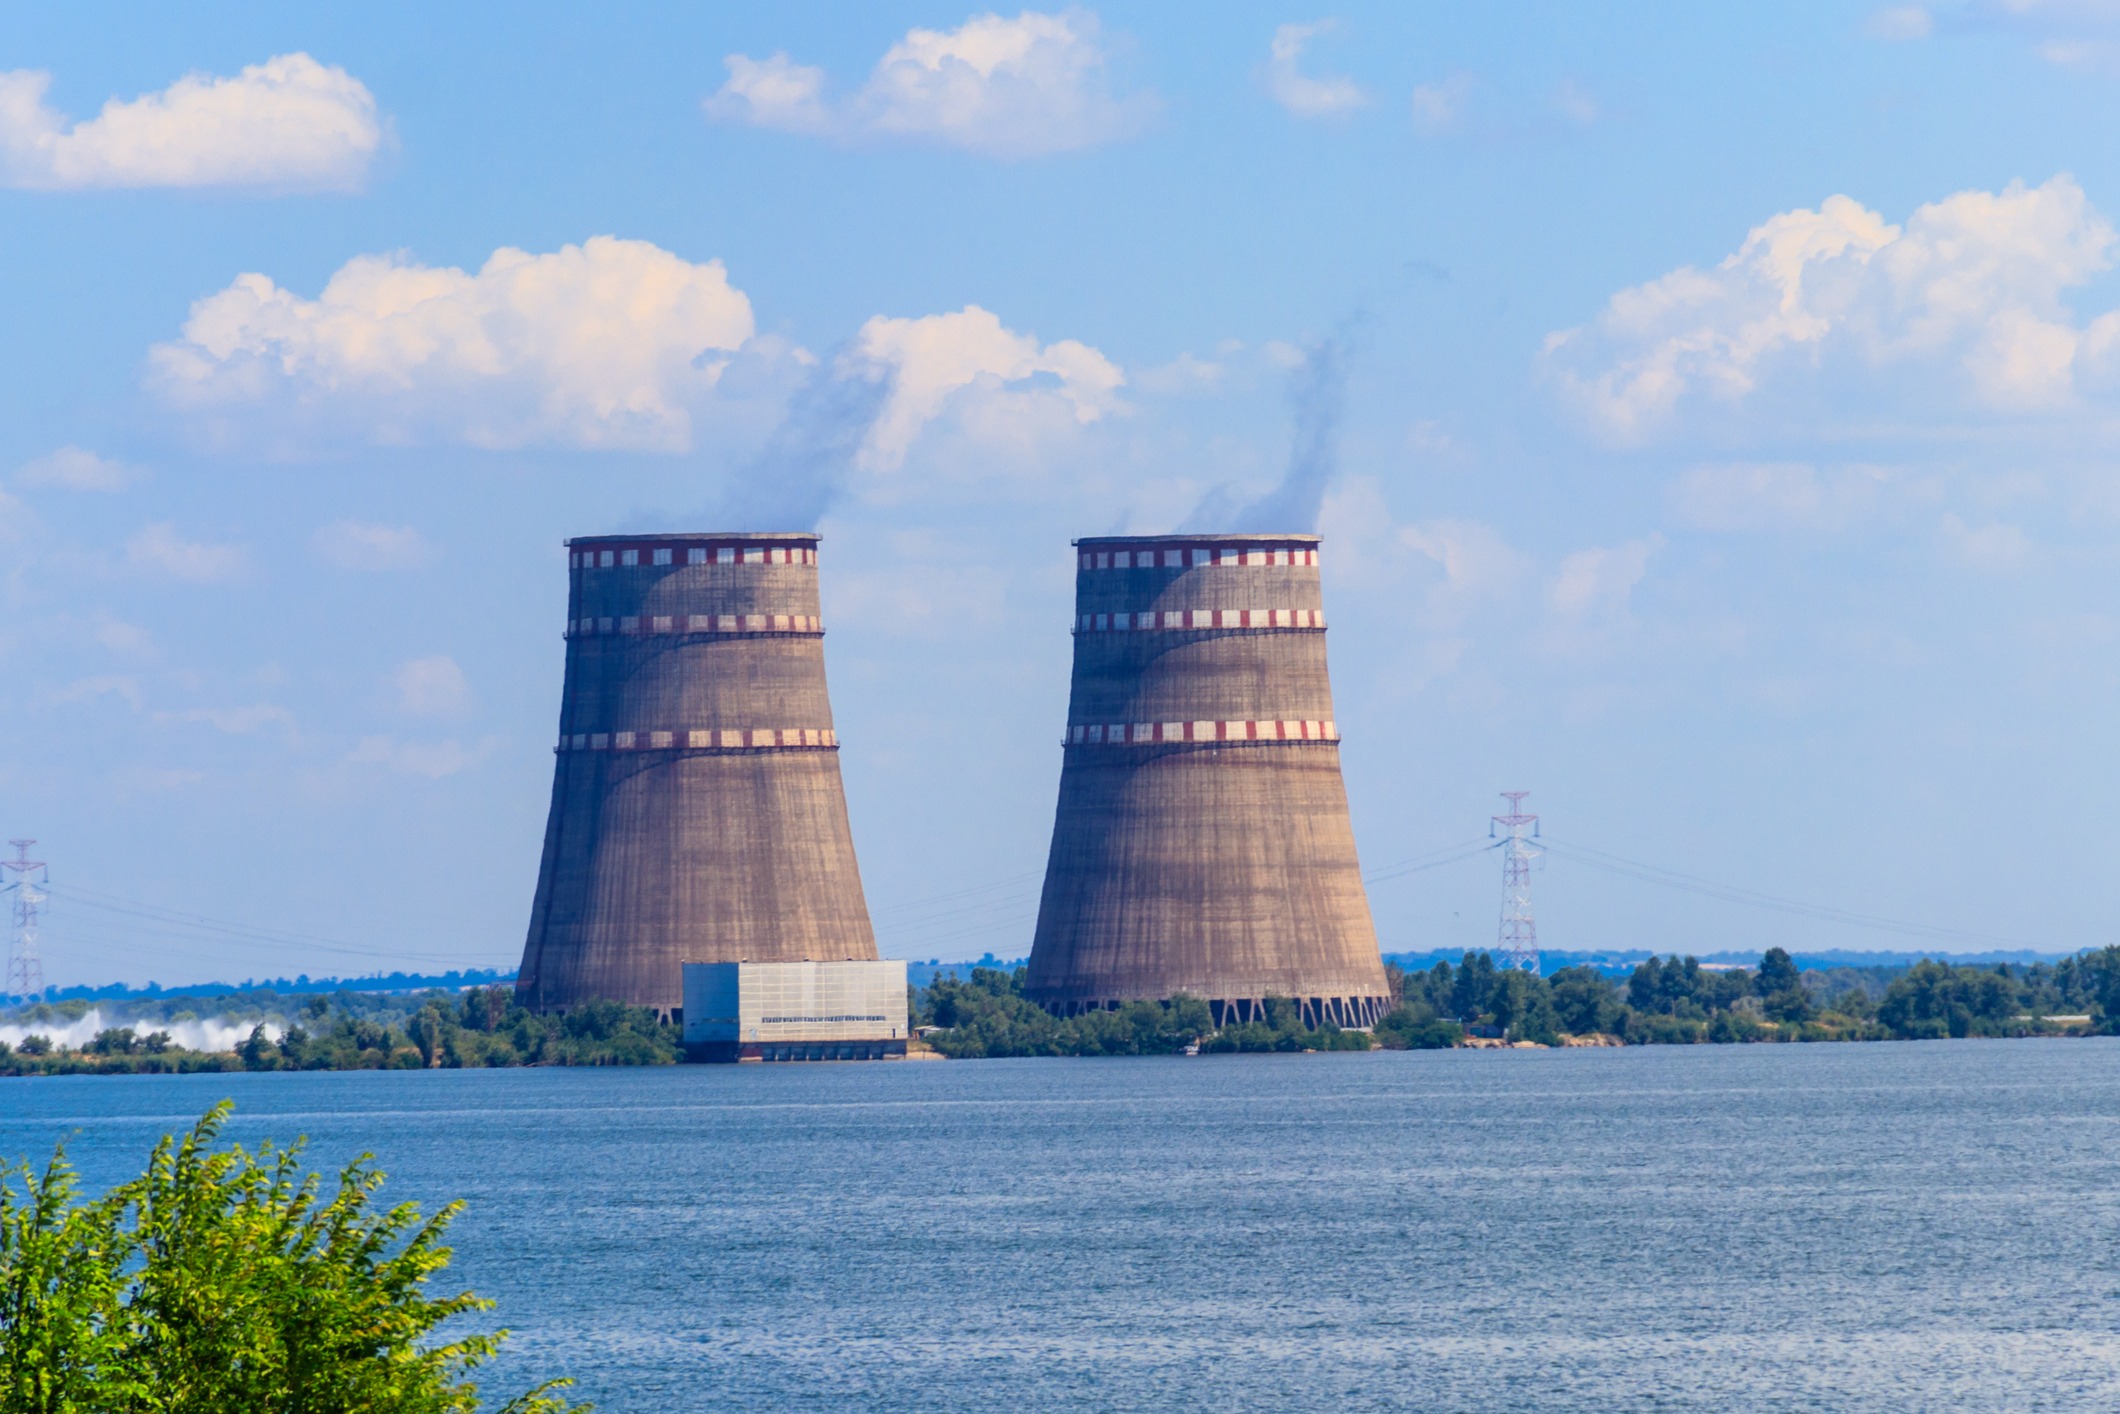 Russian Aggression Against Ukraine: Impact on Nuclear Issues